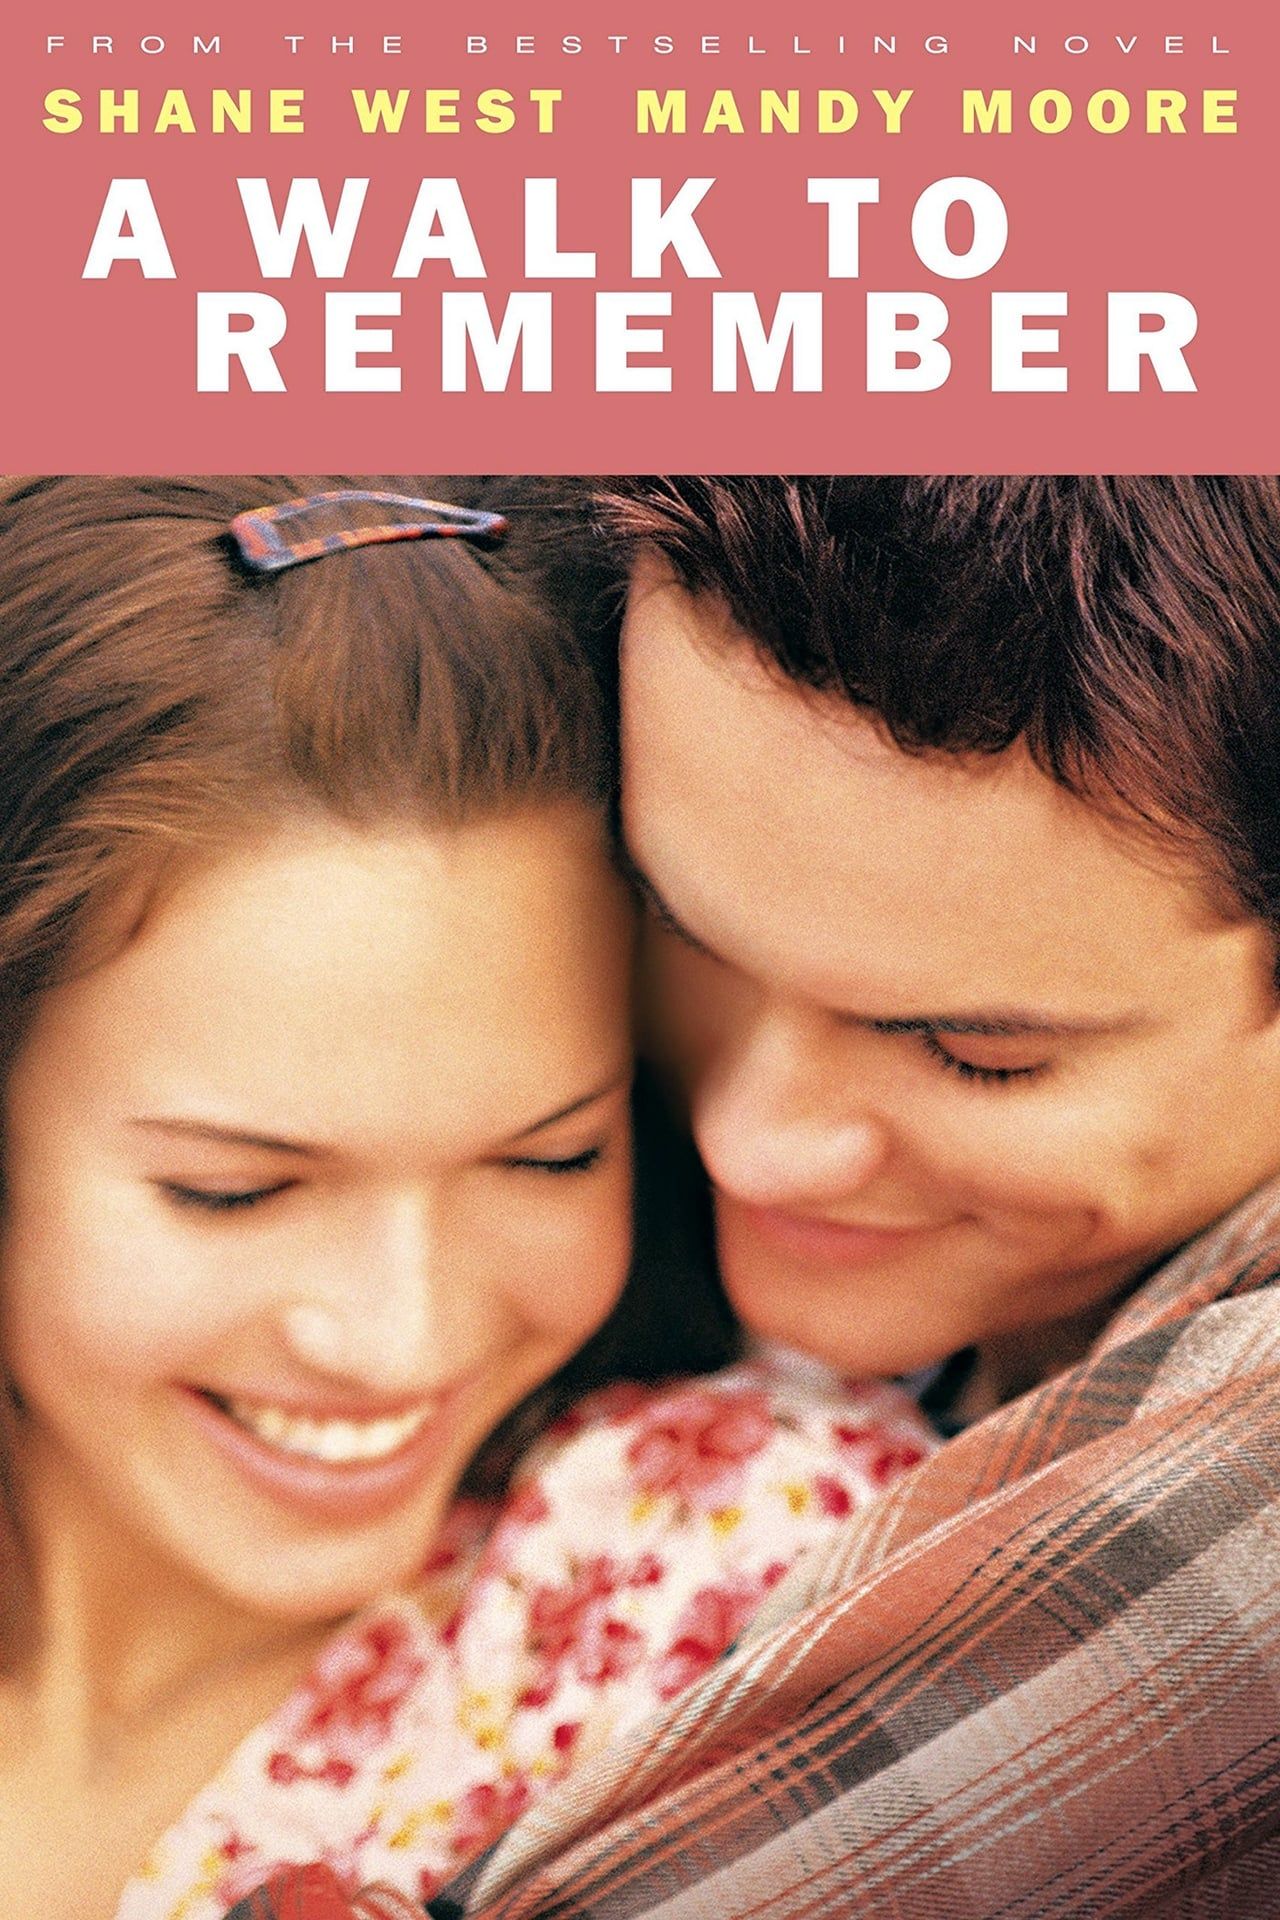 A Walk to Remember Movie Poster with Mandy Moore and Shane West